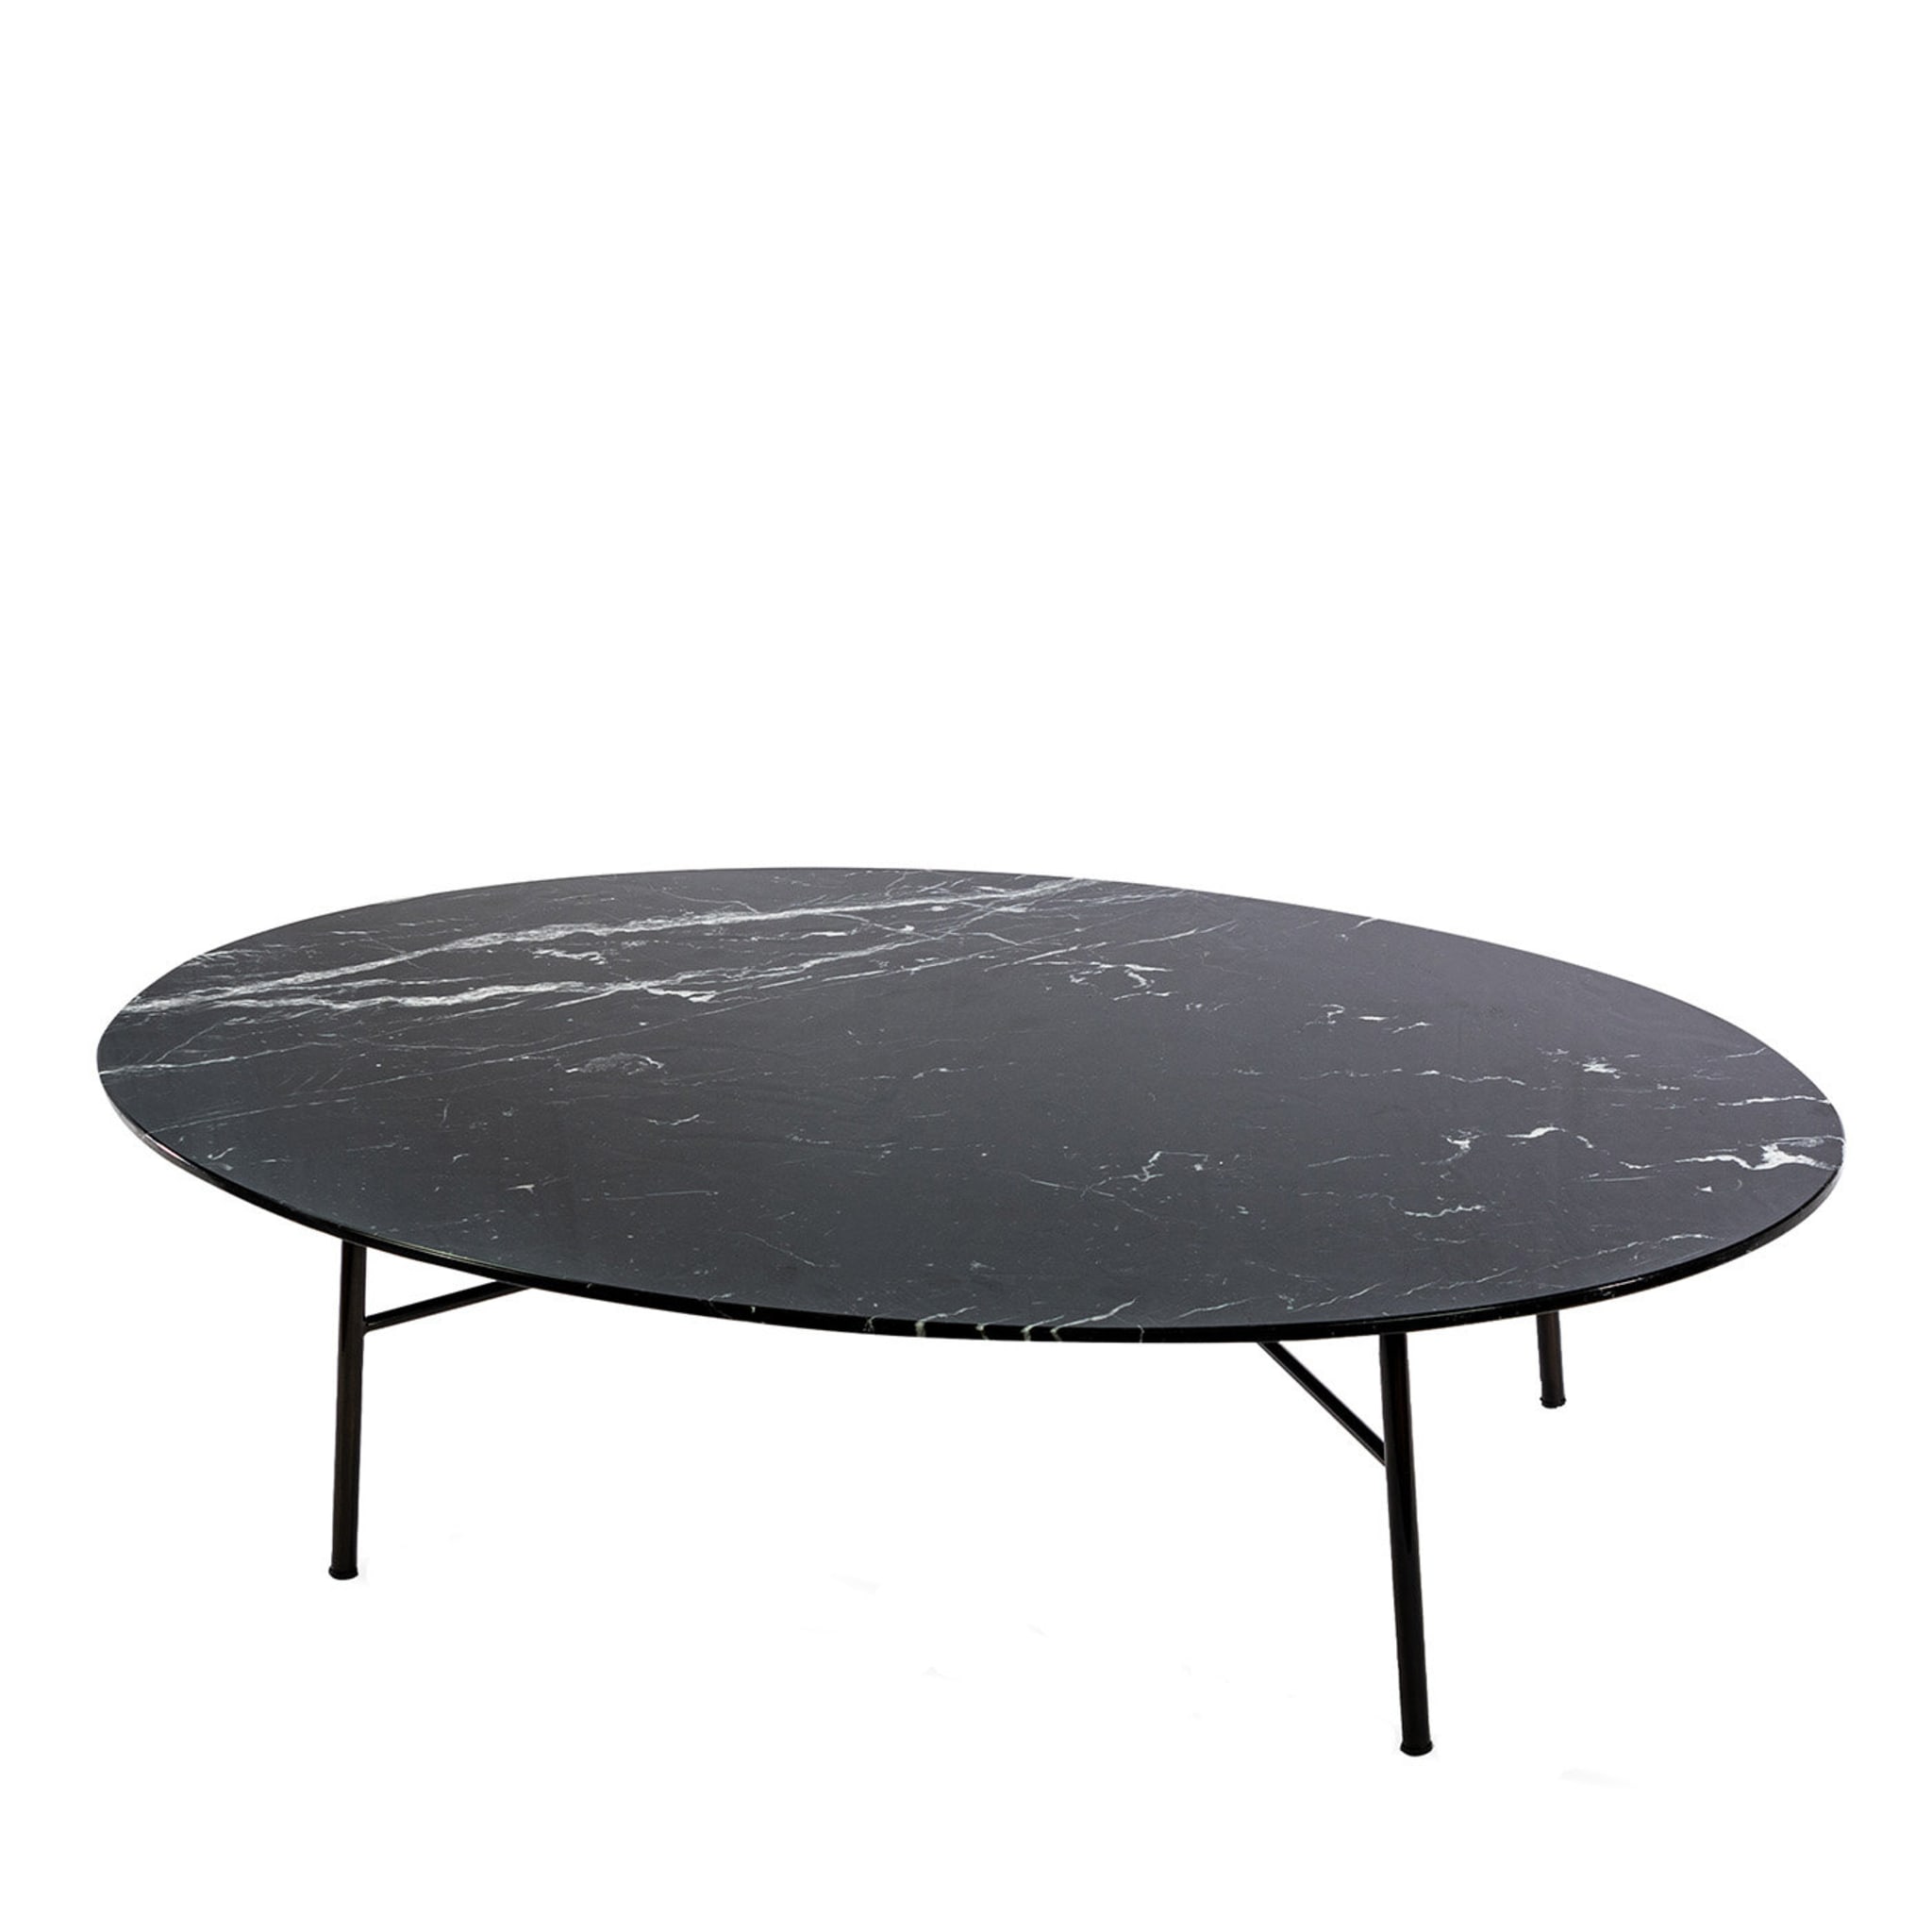 Yuki Oval Coffee Table with Black Marquinia Top # 1 by Ep Studio - Main view